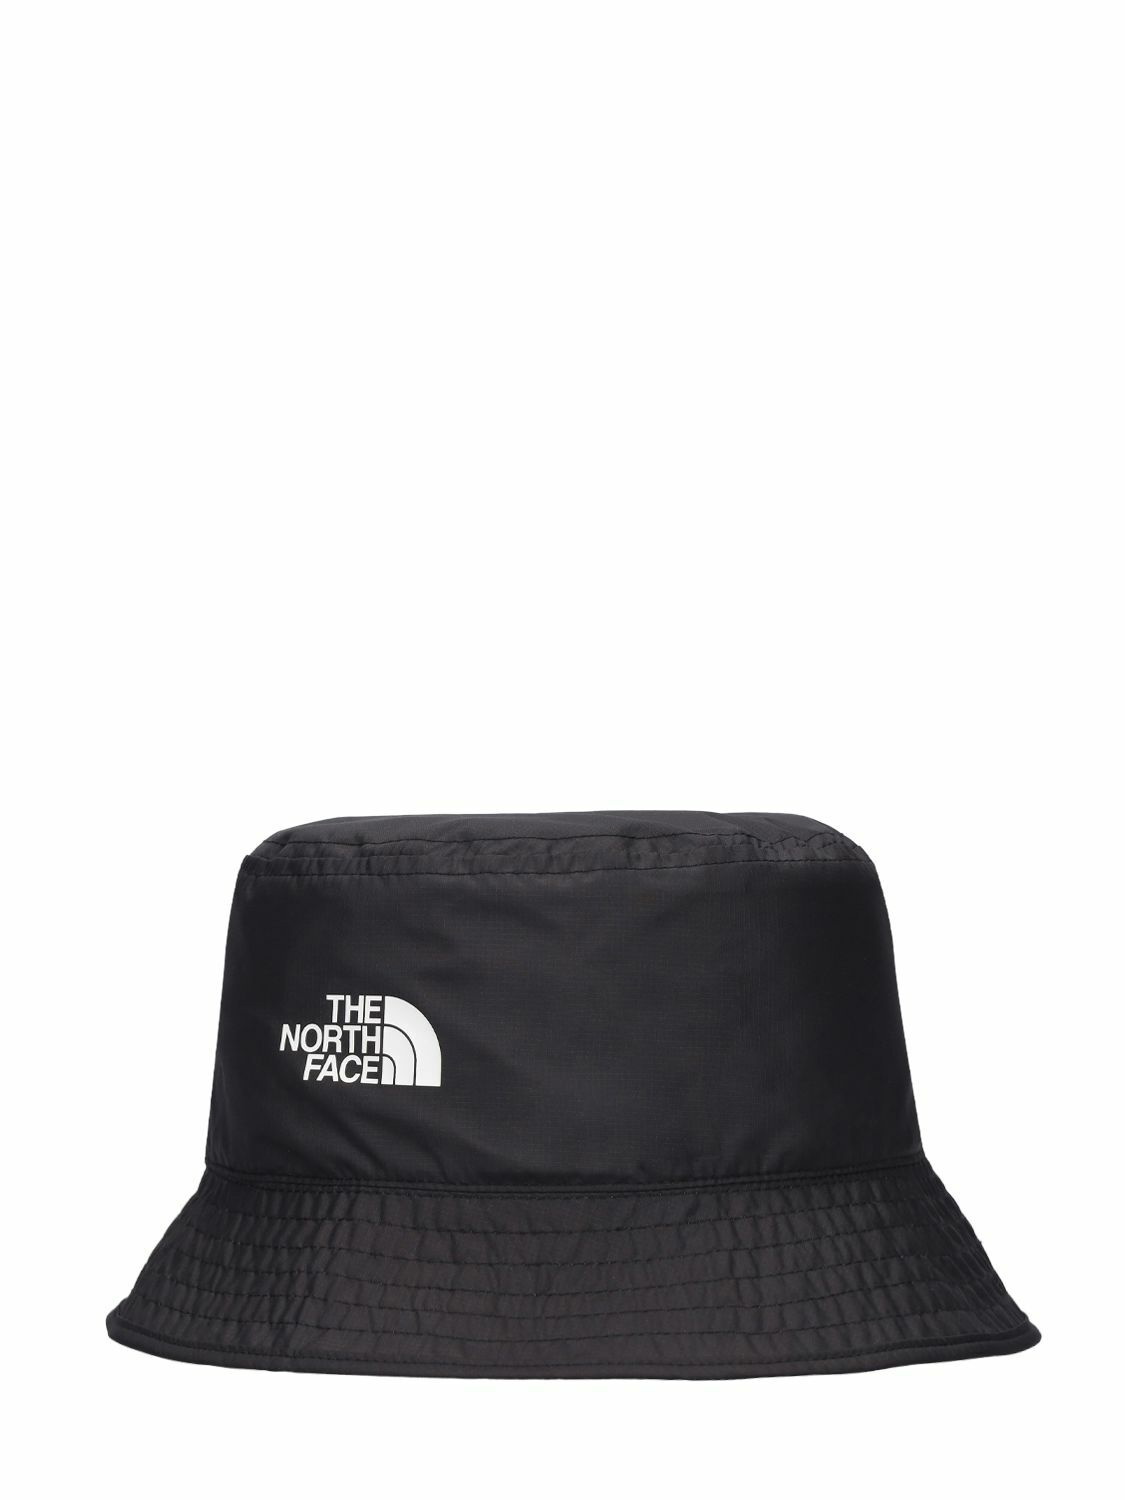 THE NORTH FACE Sun Stash Reversible Bucket Hat The North Face